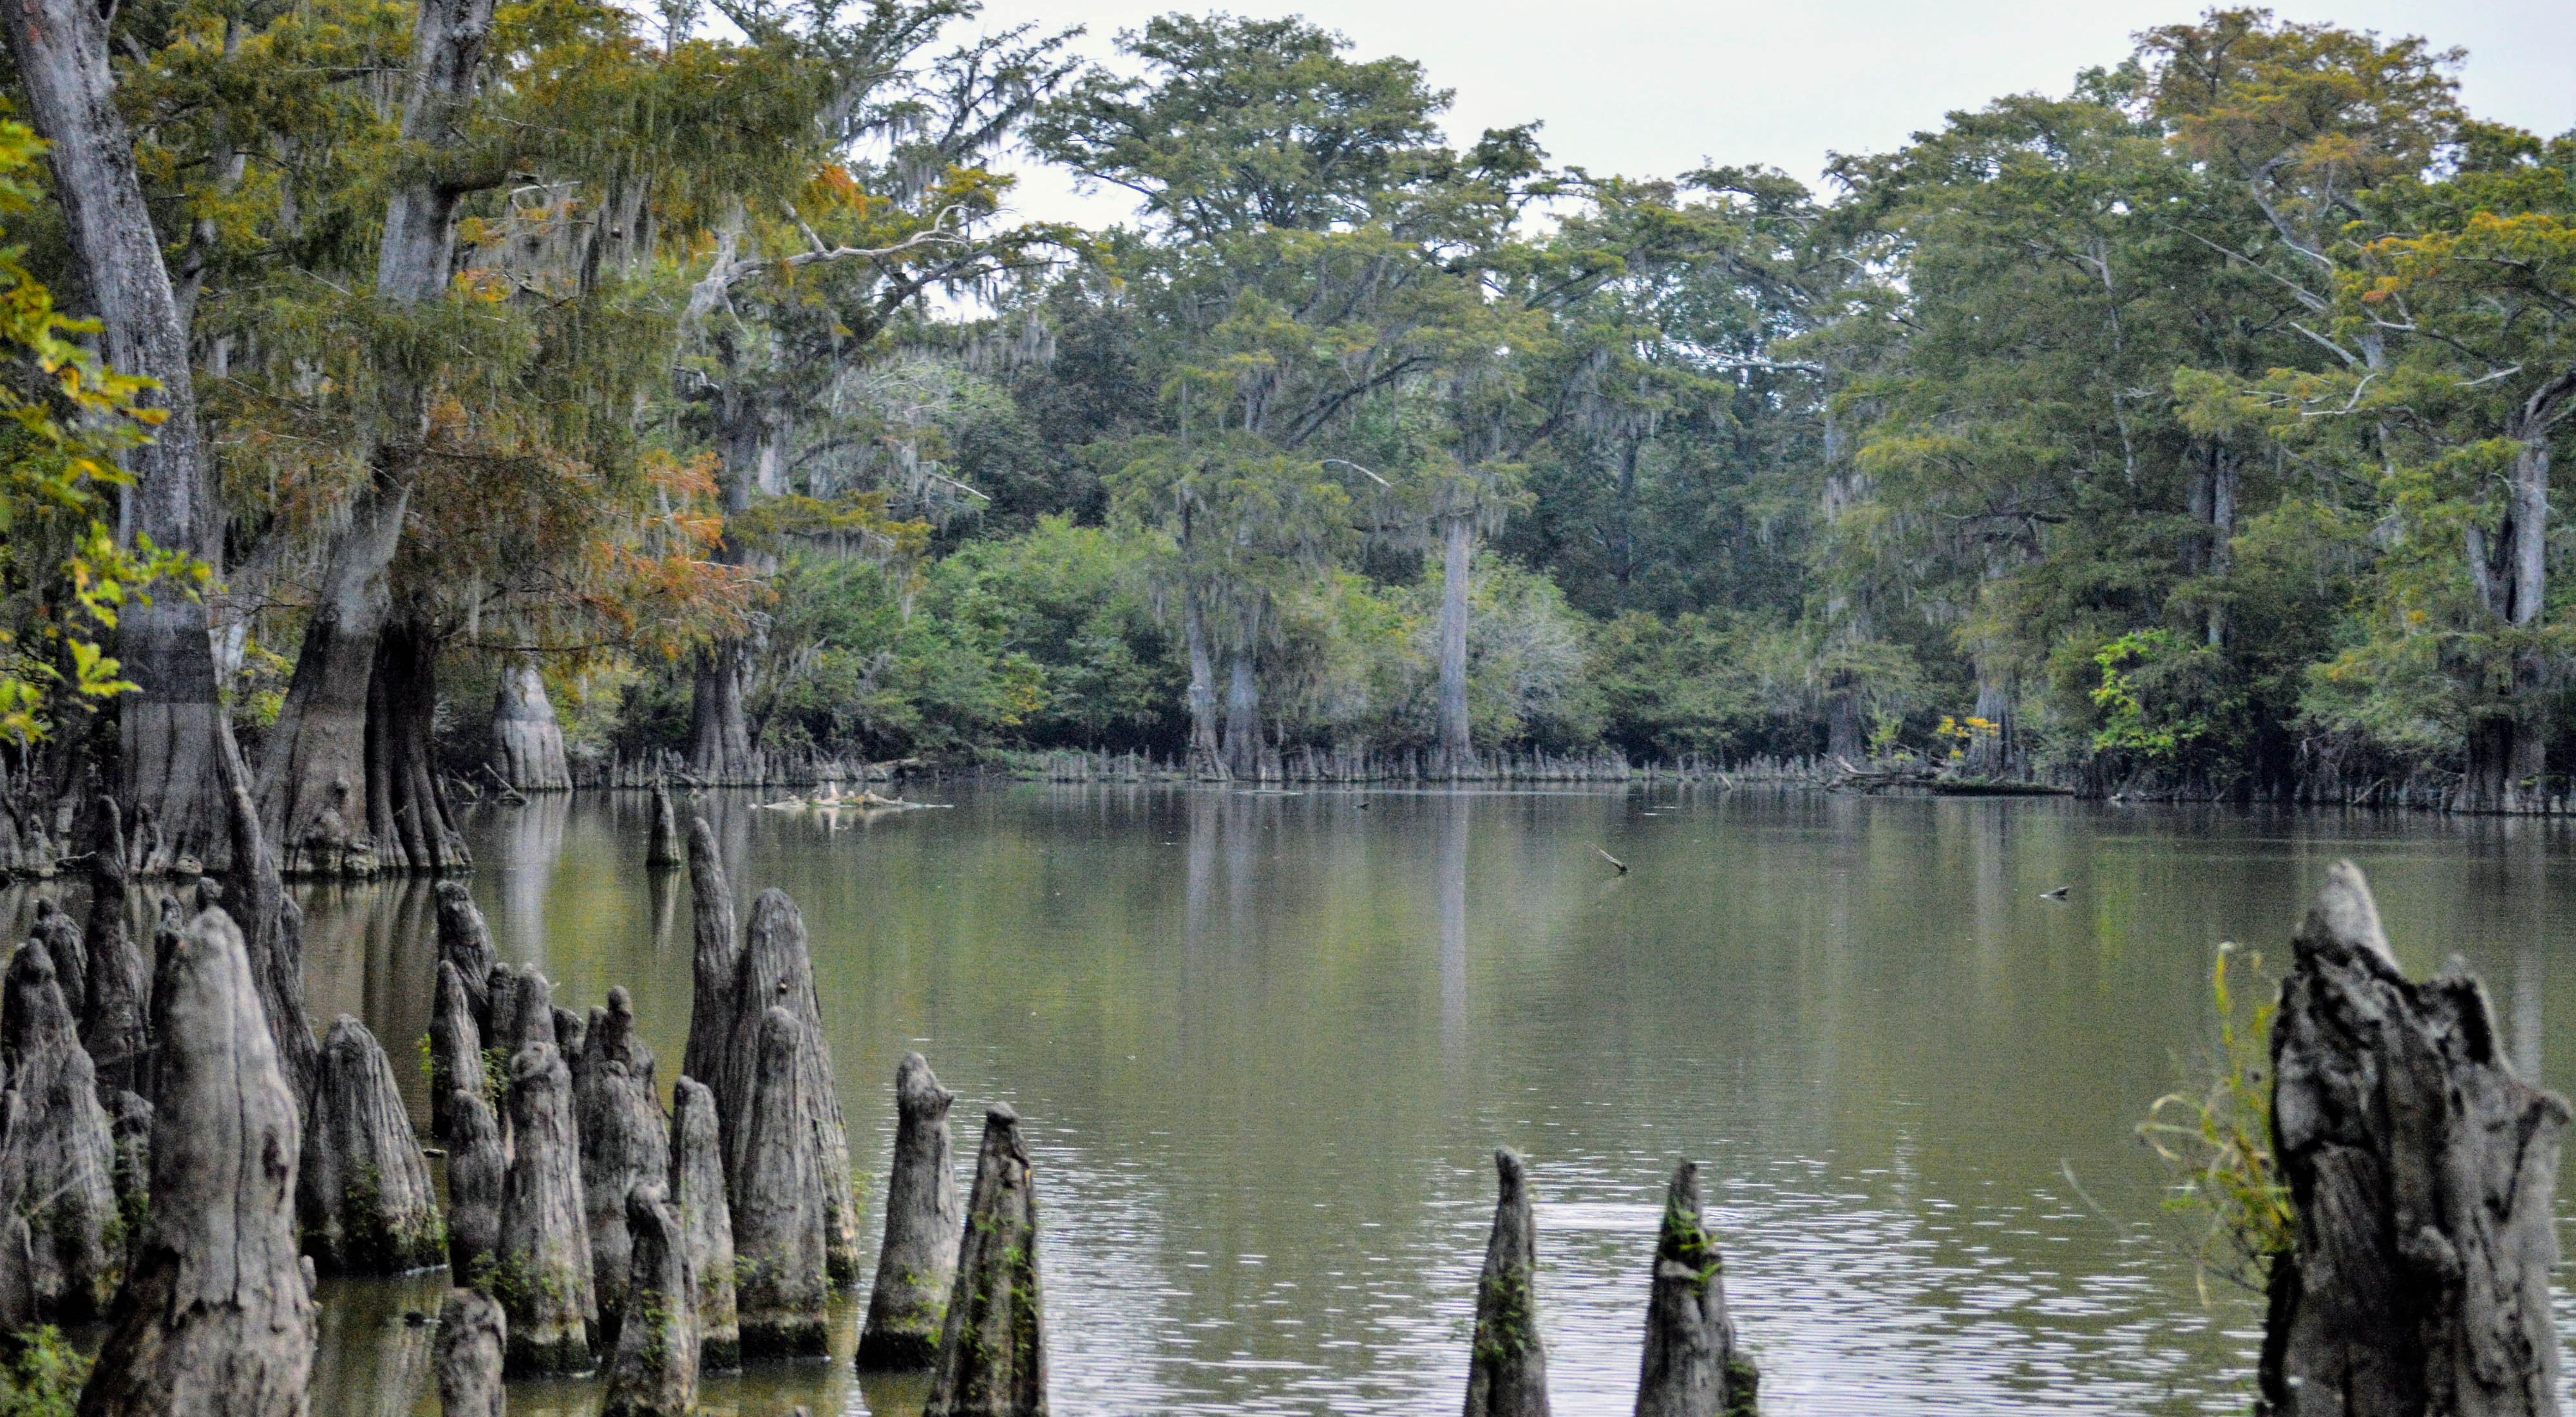 with cypress knees sticking up from the water.